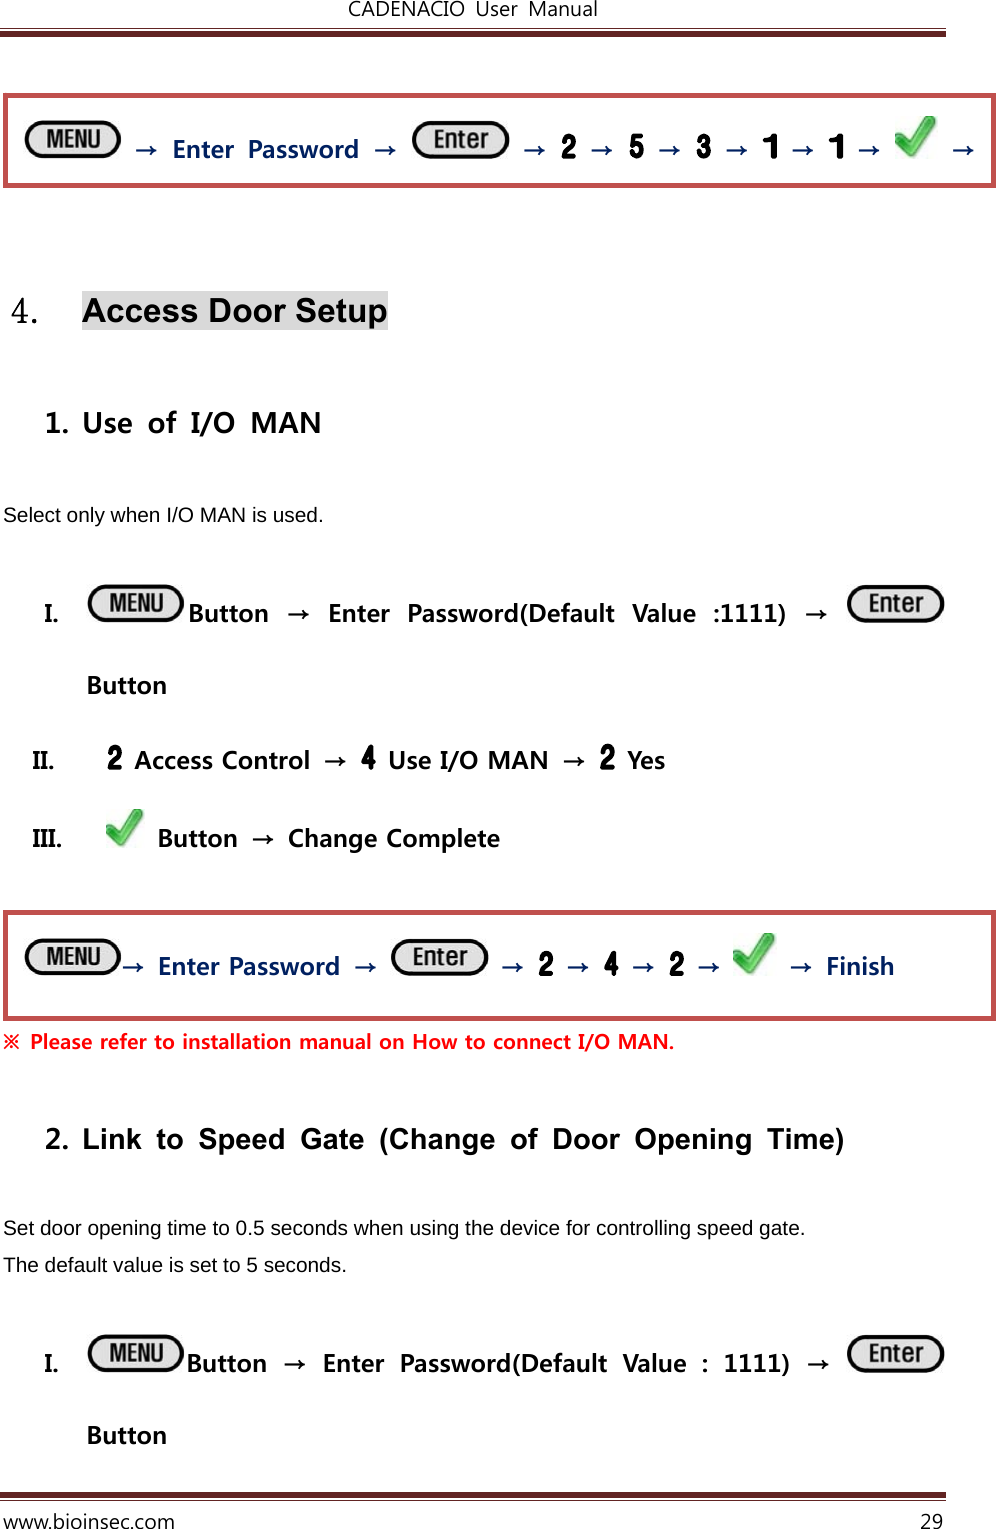 CADENACIO  User  Manual  www.bioinsec.com 29     4. Access Door Setup  1. Use of I/O MAN  Select only when I/O MAN is used.  I. Button  →  Enter  Password(Default  Value  :1111)  →   Button II.   Access Control  →   Use I/O MAN →   Yes   III.   Button  →  Change Complete   ※  Please refer to installation manual on How to connect I/O MAN.    2. Link to Speed Gate (Change of Door Opening Time)  Set door opening time to 0.5 seconds when using the device for controlling speed gate.  The default value is set to 5 seconds.   I. Button  →  Enter  Password(Default  Value  :  1111)  →   Button →  Enter Password  →   →   →   →   →    →  Finish  → Enter Password →   →   →   →   →   →   →   → 